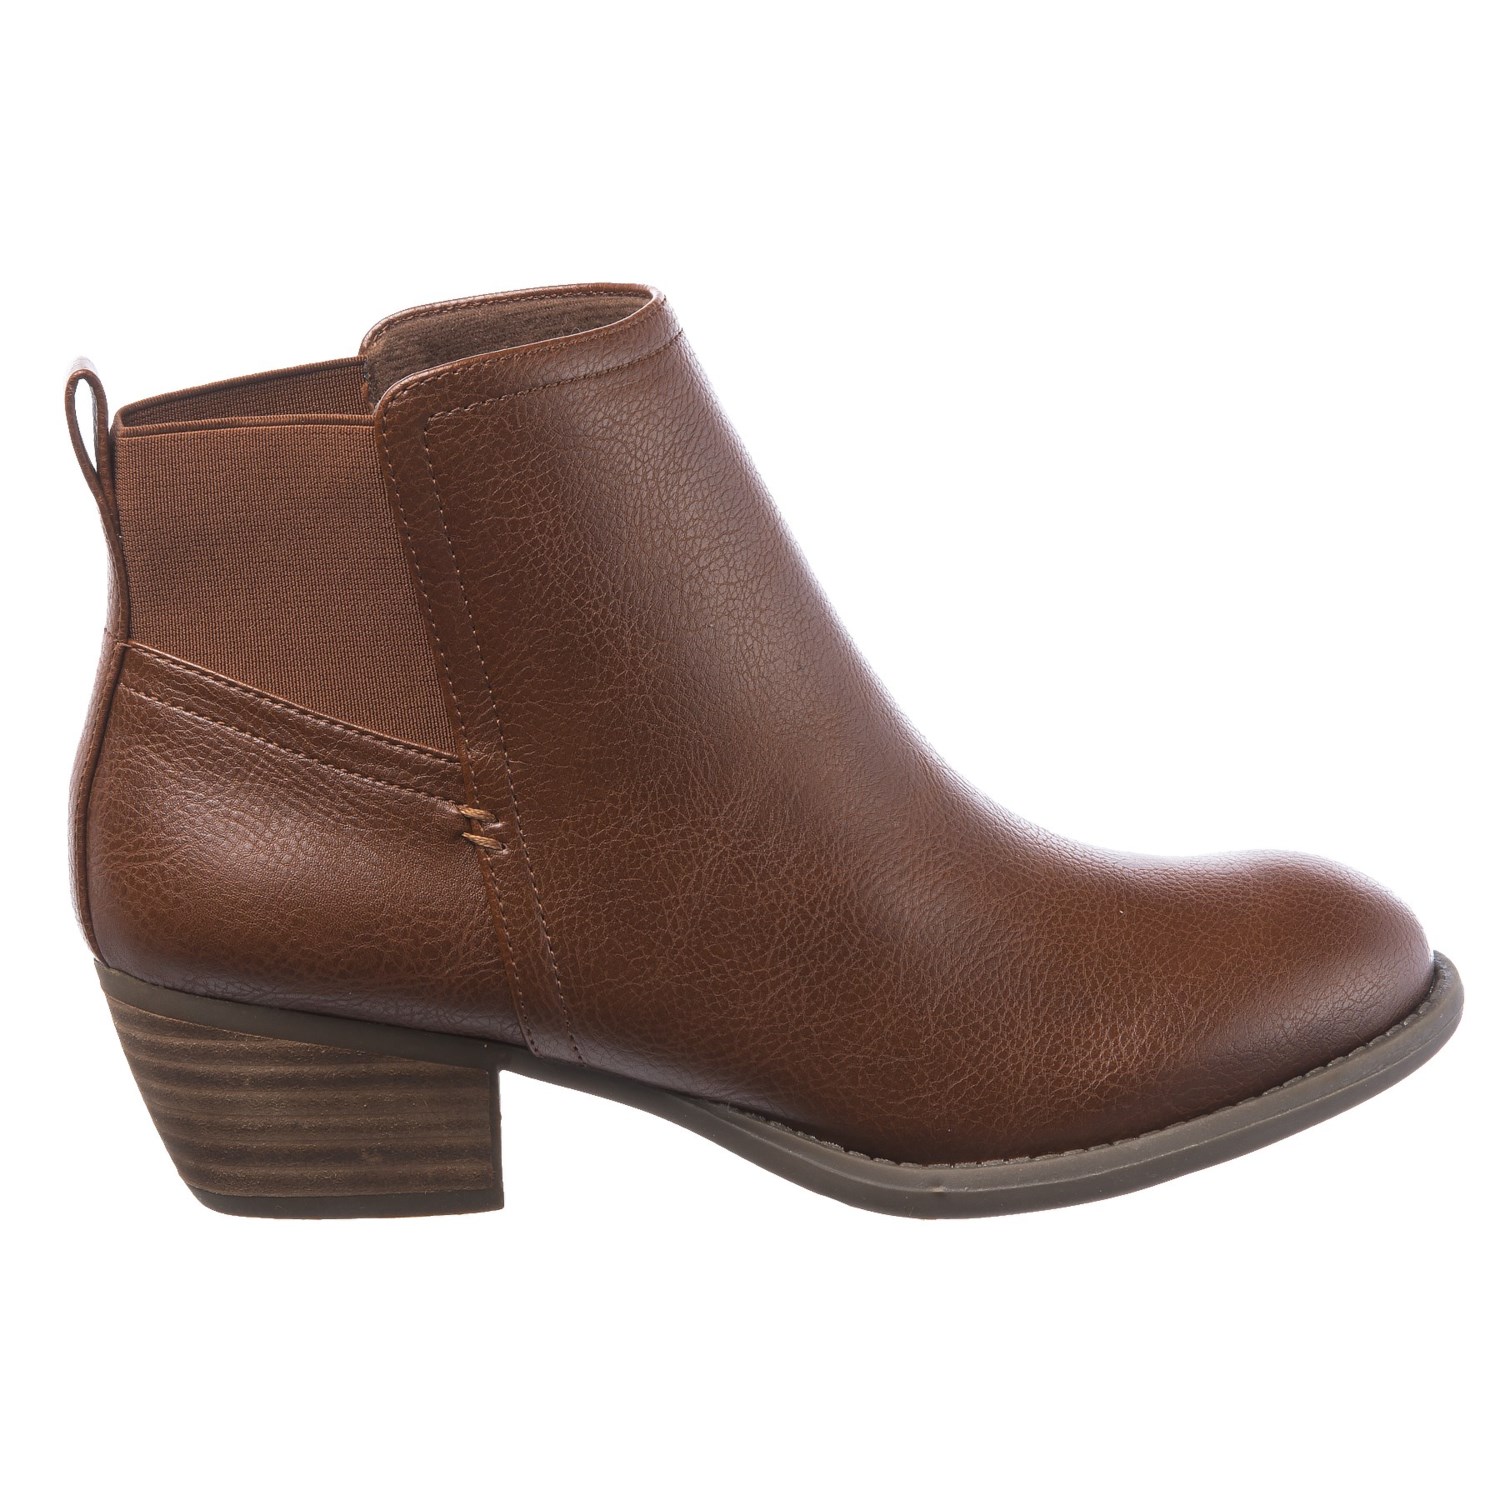 Dr. Scholl’s Vegan Leather Ankle Boots (For Women) - Save 72%